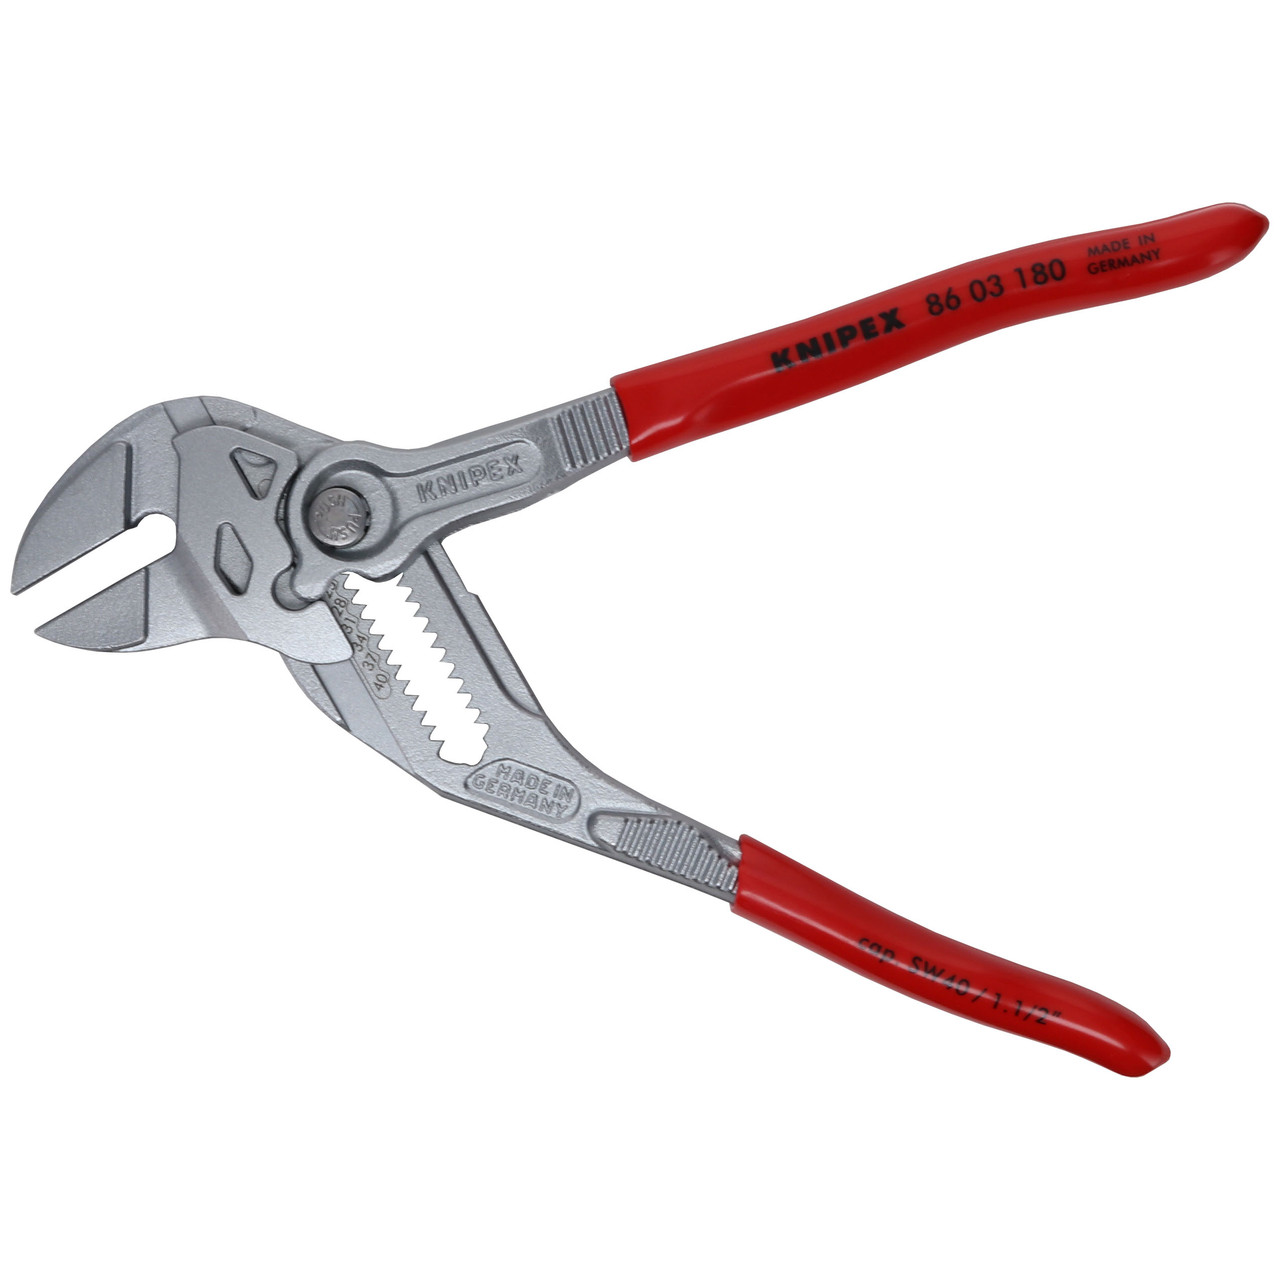 Soft Touch Solutions: 3 Pliers with plastic jaws for brass, chrome,  plastic, etc. Knipex, IPS 